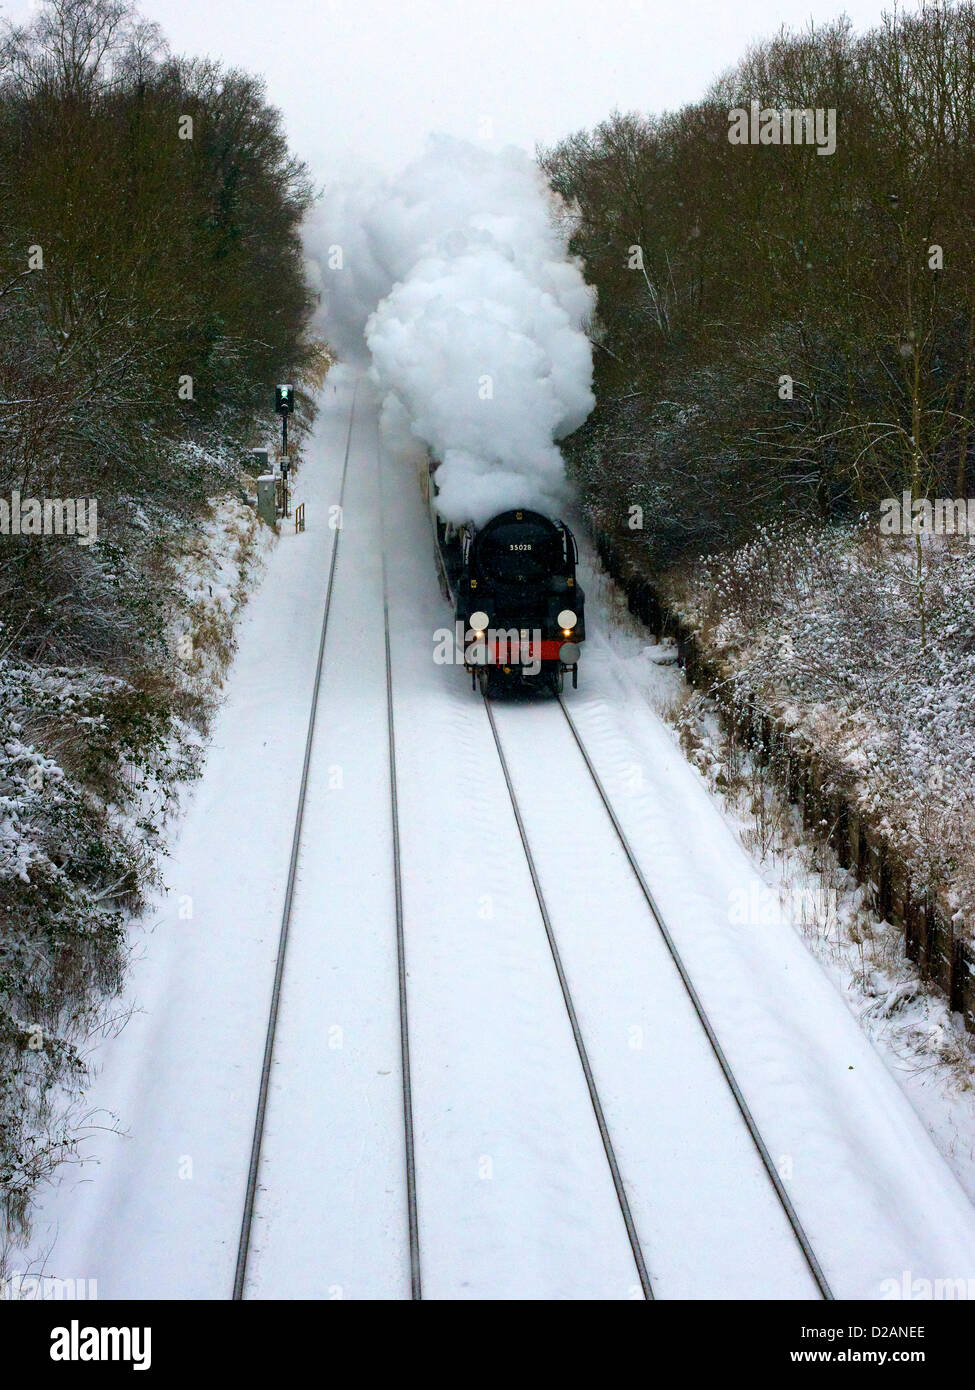 The VS Orient Express Steam Locomotive SR Merchant Navy Clan Line Class 4-6-2 No 35028 speeds through snowy Reigate in Surrey, 1501hrs Friday 18th January 2013 en route to London Victoria, UK. Photo by Lindsay Constable/Alamy Live News Stock Photo